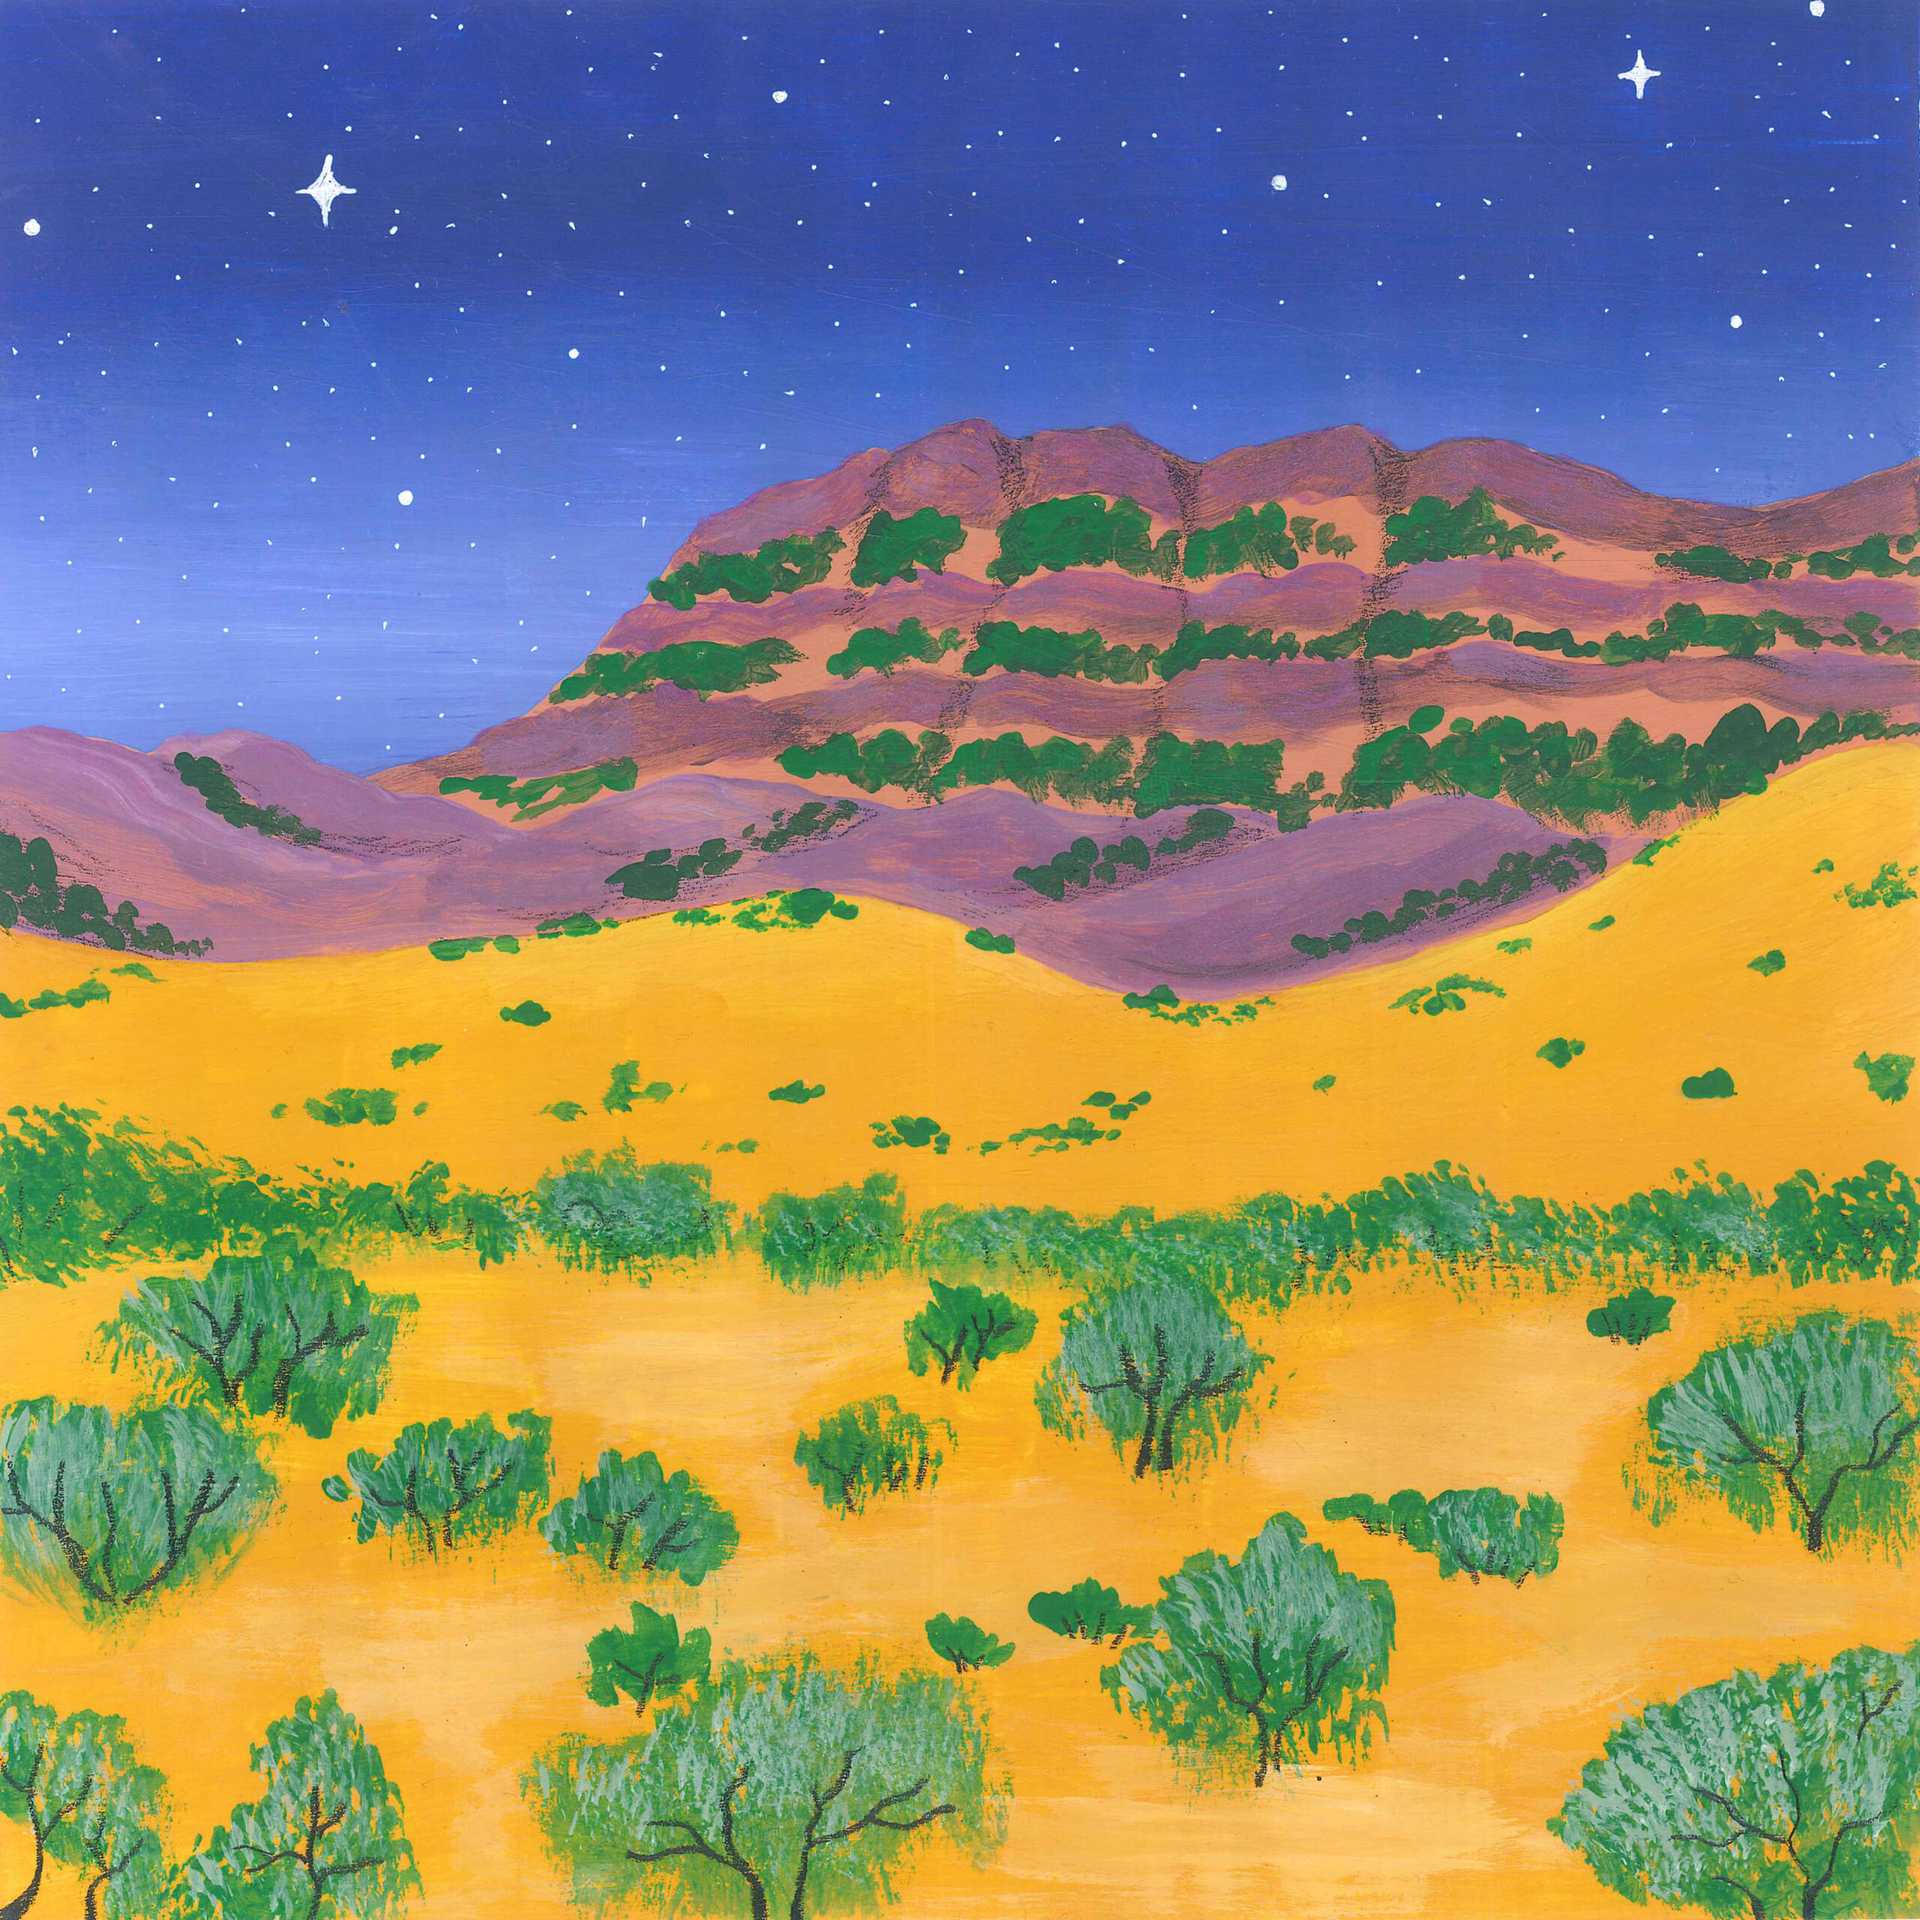 Coyotes in Mexican Sierra - nature landscape painting - earth.fm